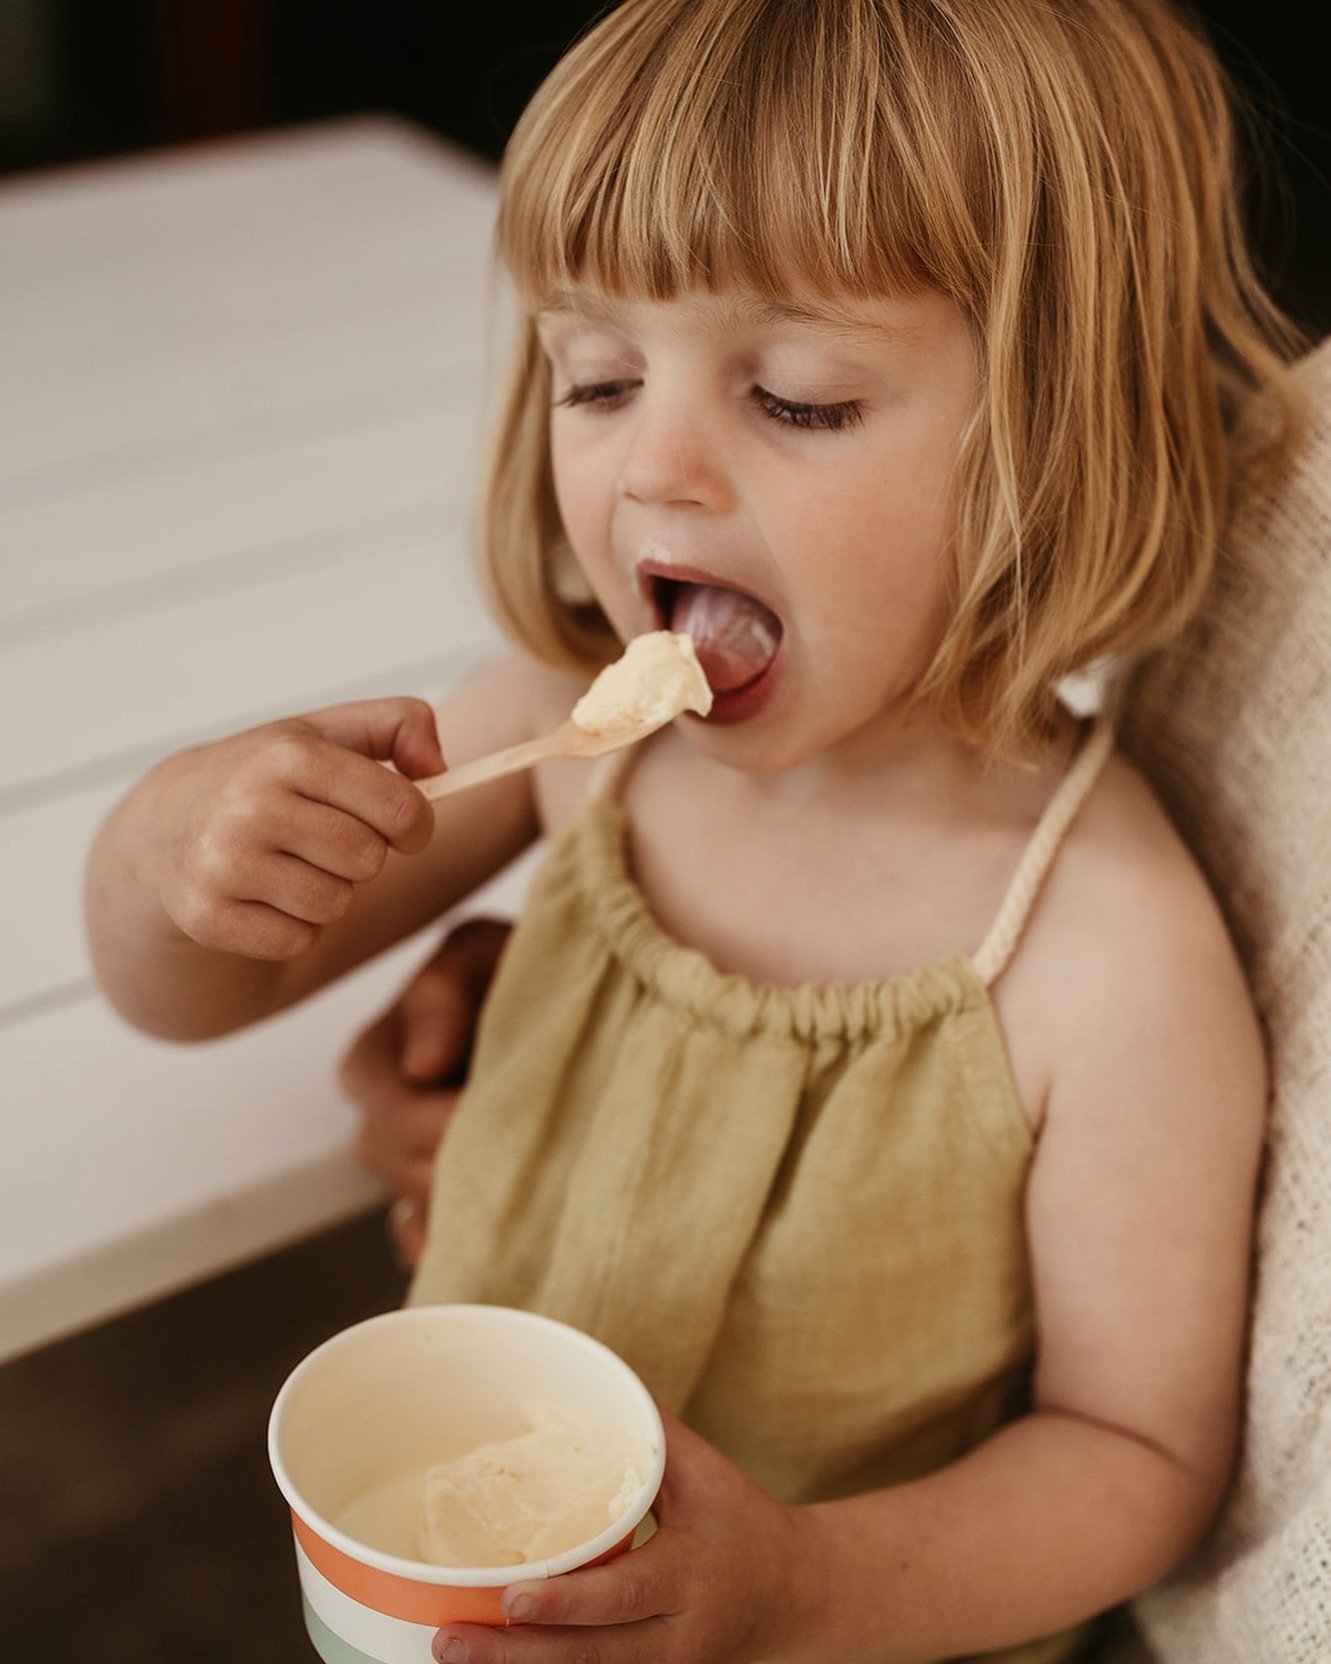 Ice cream dates are becoming a favourite addition to your family sessions, cute but chaotic 🍦